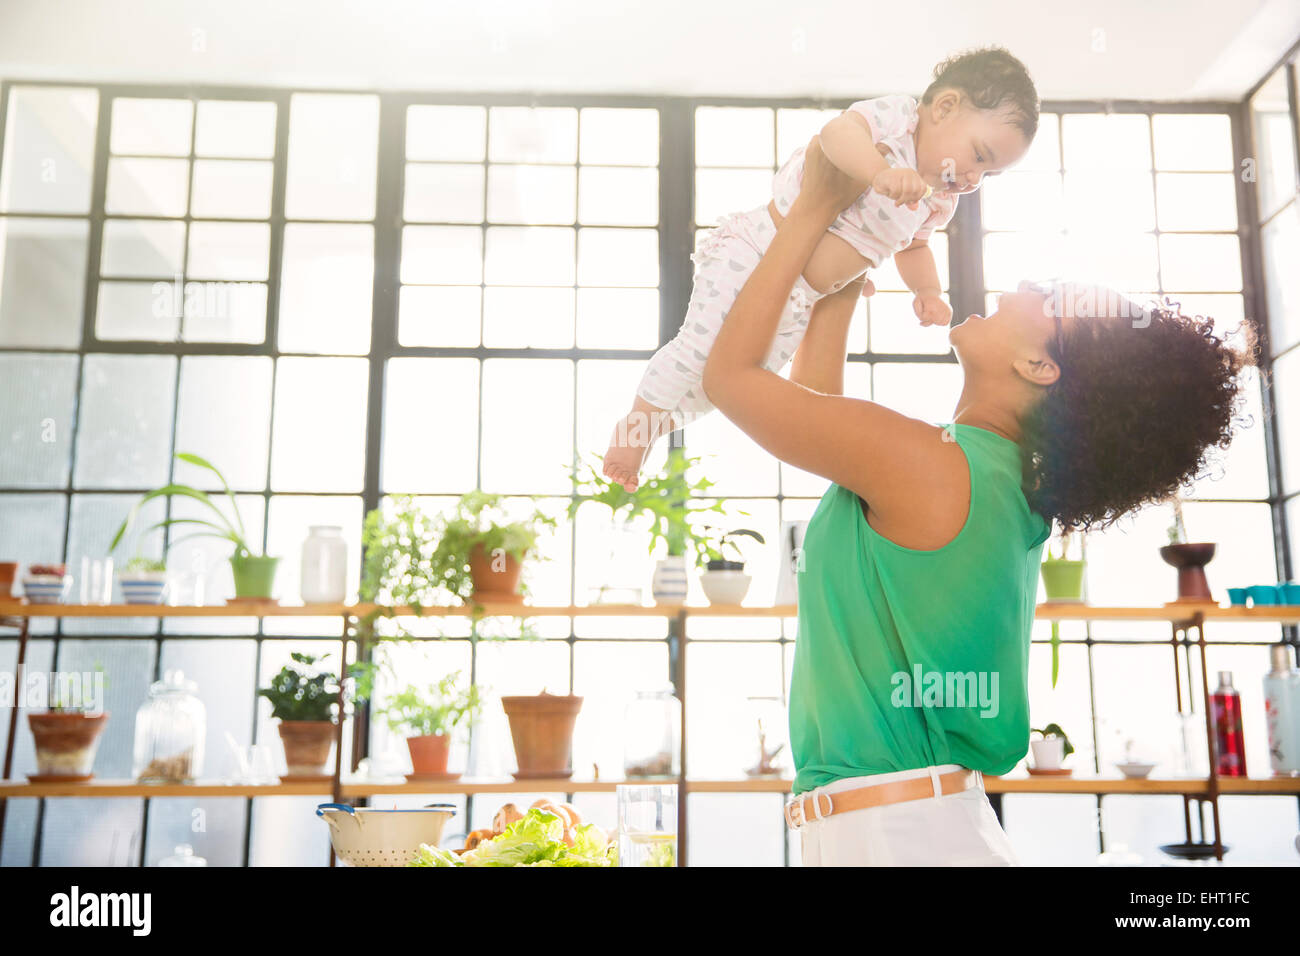 Mother lifting her daughter overhead Stock Photo